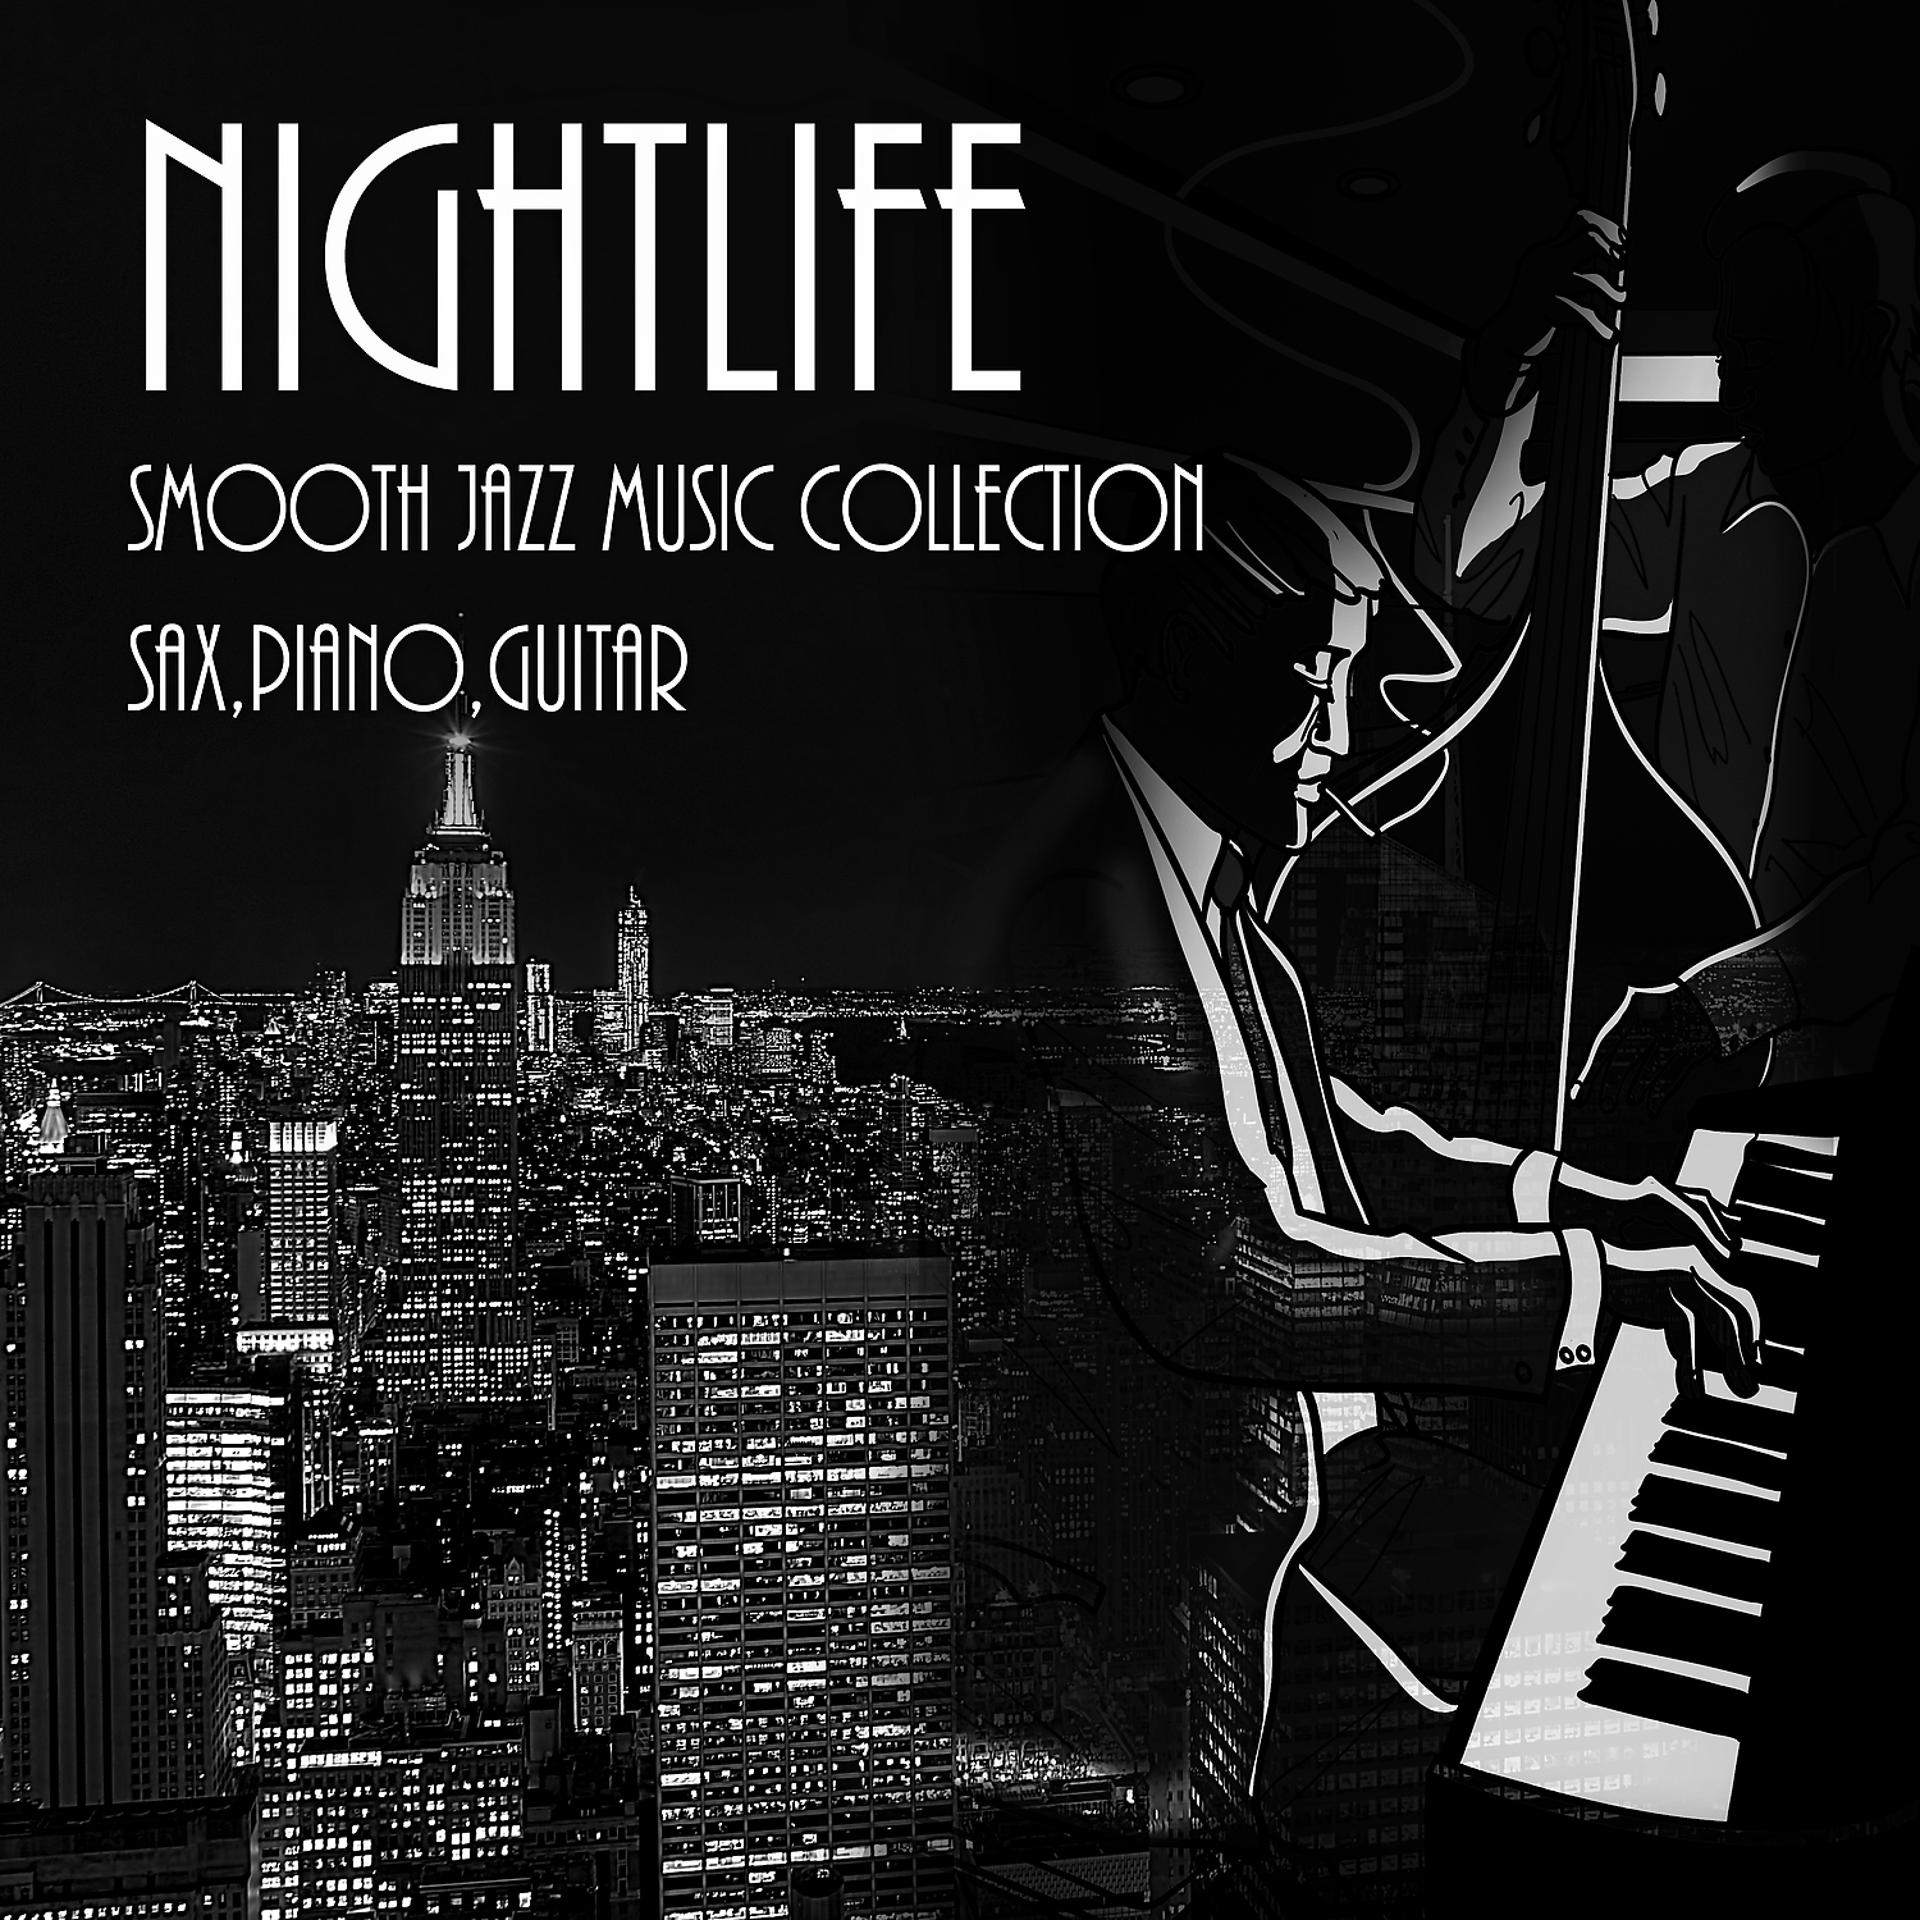 Постер альбома Nightlife & Smooth Jazz Music Collection: Sax, Piano, Guitar, Romatic Evening, Jazz Instrumental Session, Restaurant Music, Jazz Club, Total Relax for Lovers, Sexual Jazz Vibration for Intimate Moments